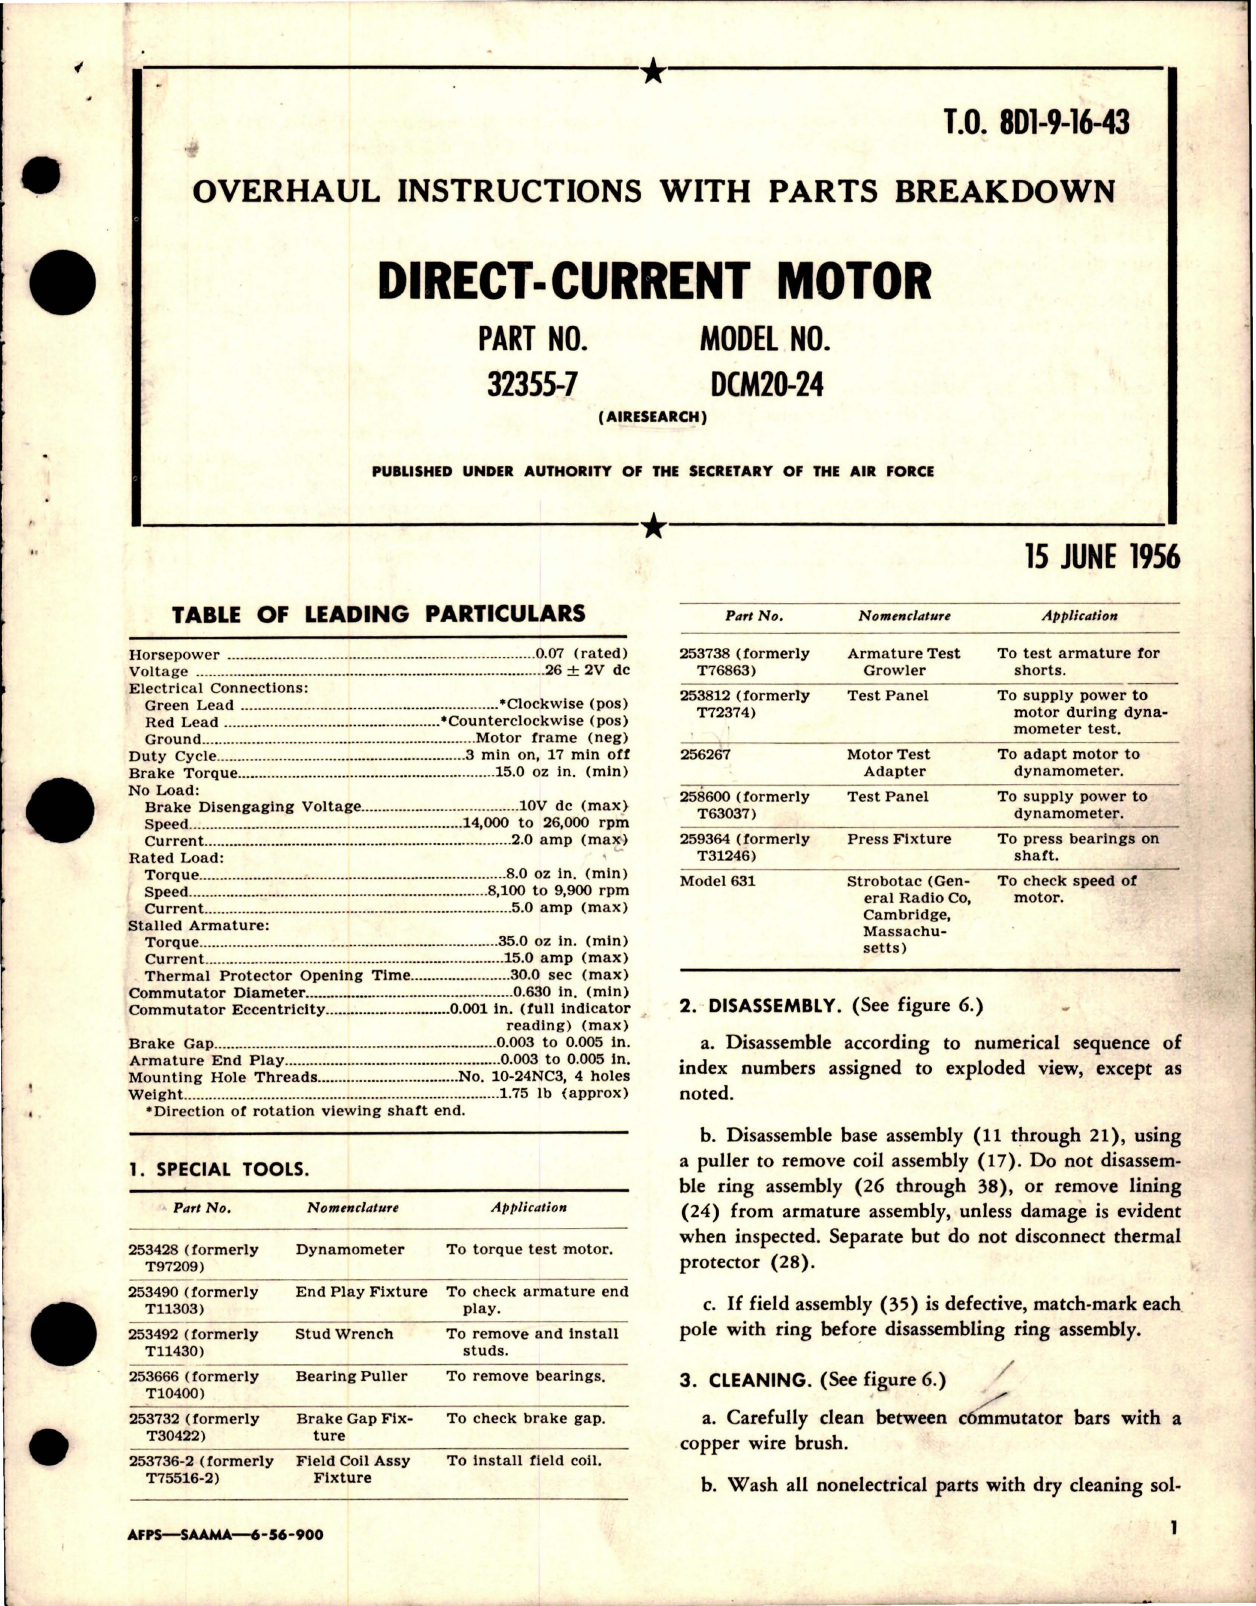 Sample page 1 from AirCorps Library document: Overhaul Instructions w Parts for Direct-Current Motor - Part 32355-7 - Model DCM20-24 